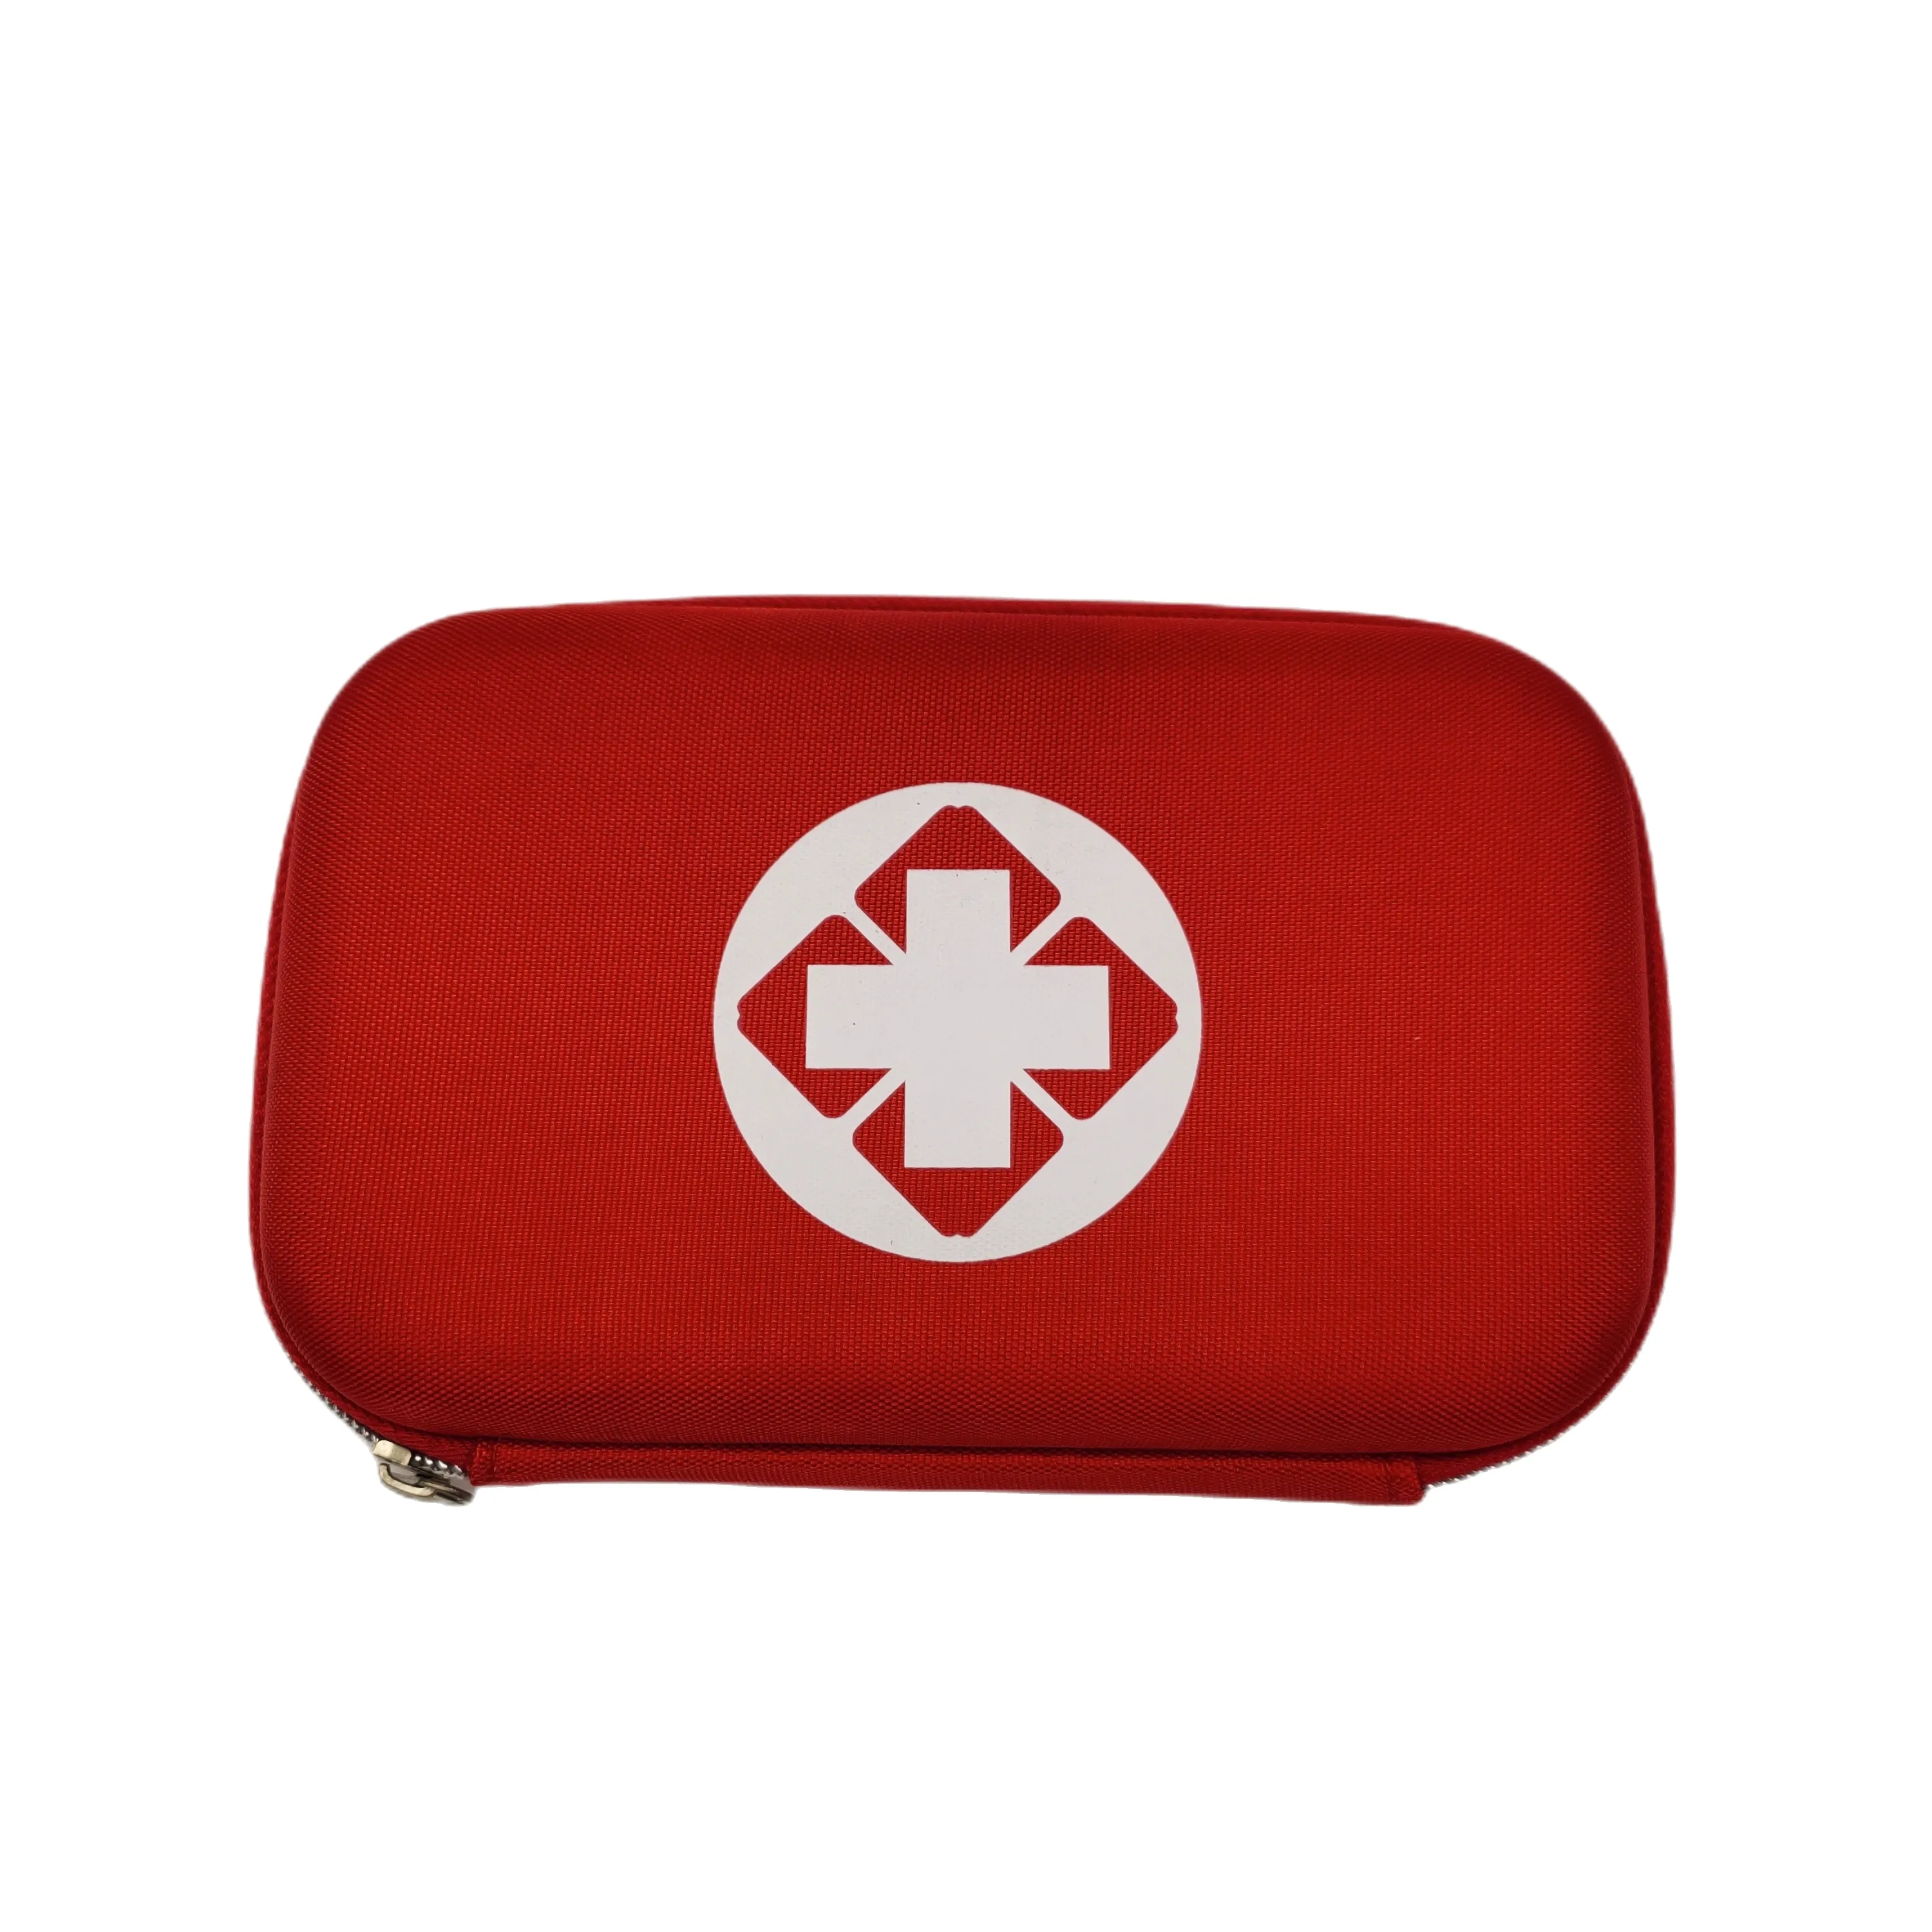 Top Seller Customized Waterproof Outdoor Emergency Trauma Survival Tactical Portable Small First Aid Kit